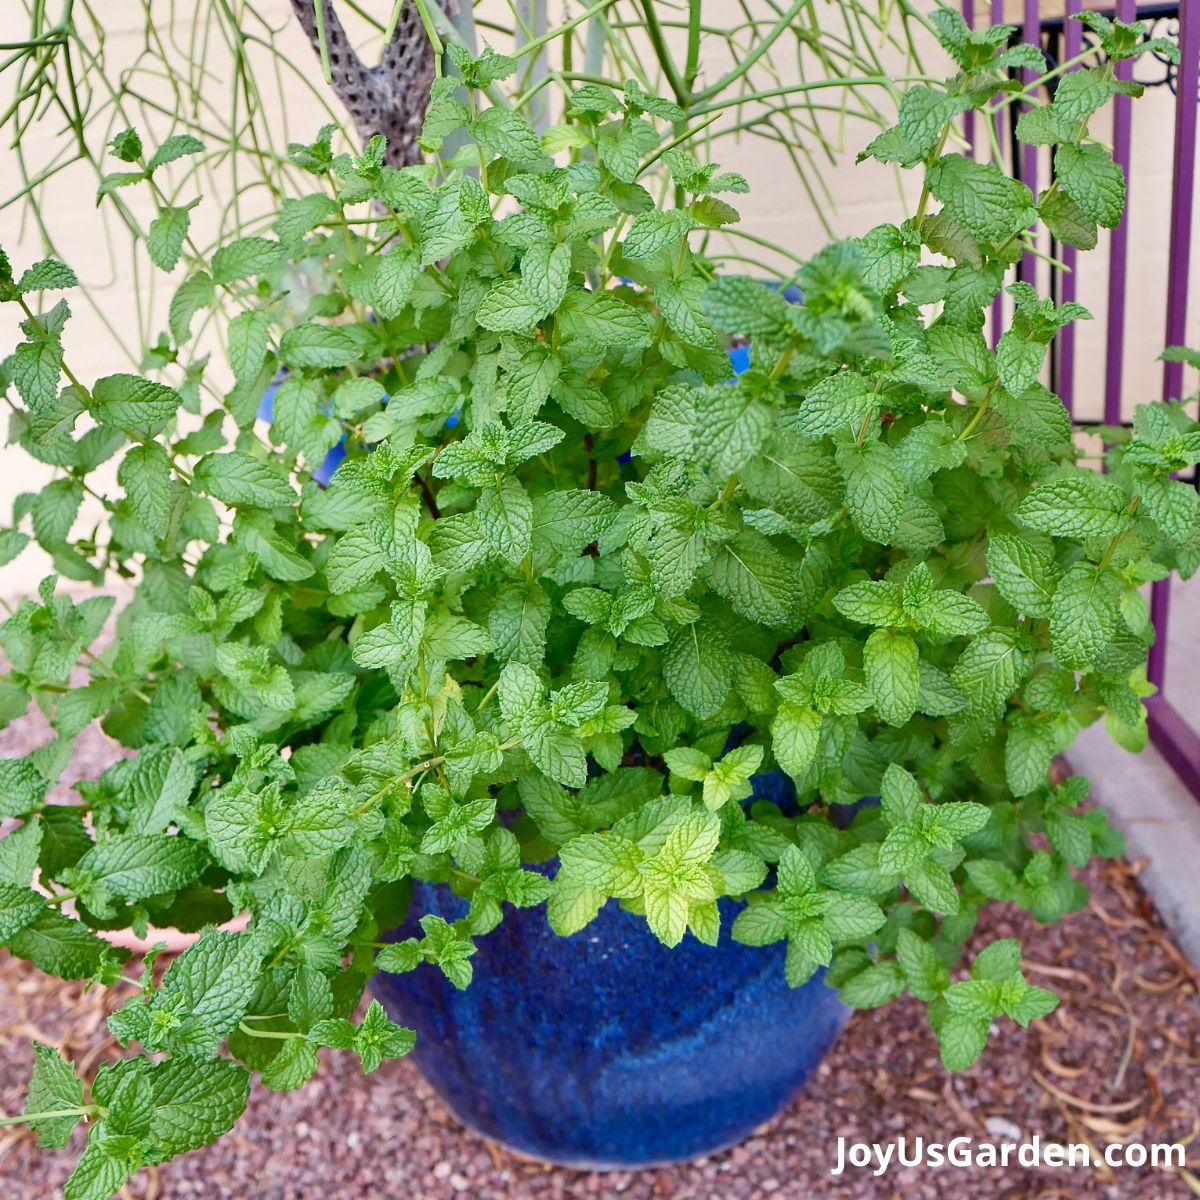 A spearmint plant growing in a blue ceramic pot outdoors. 